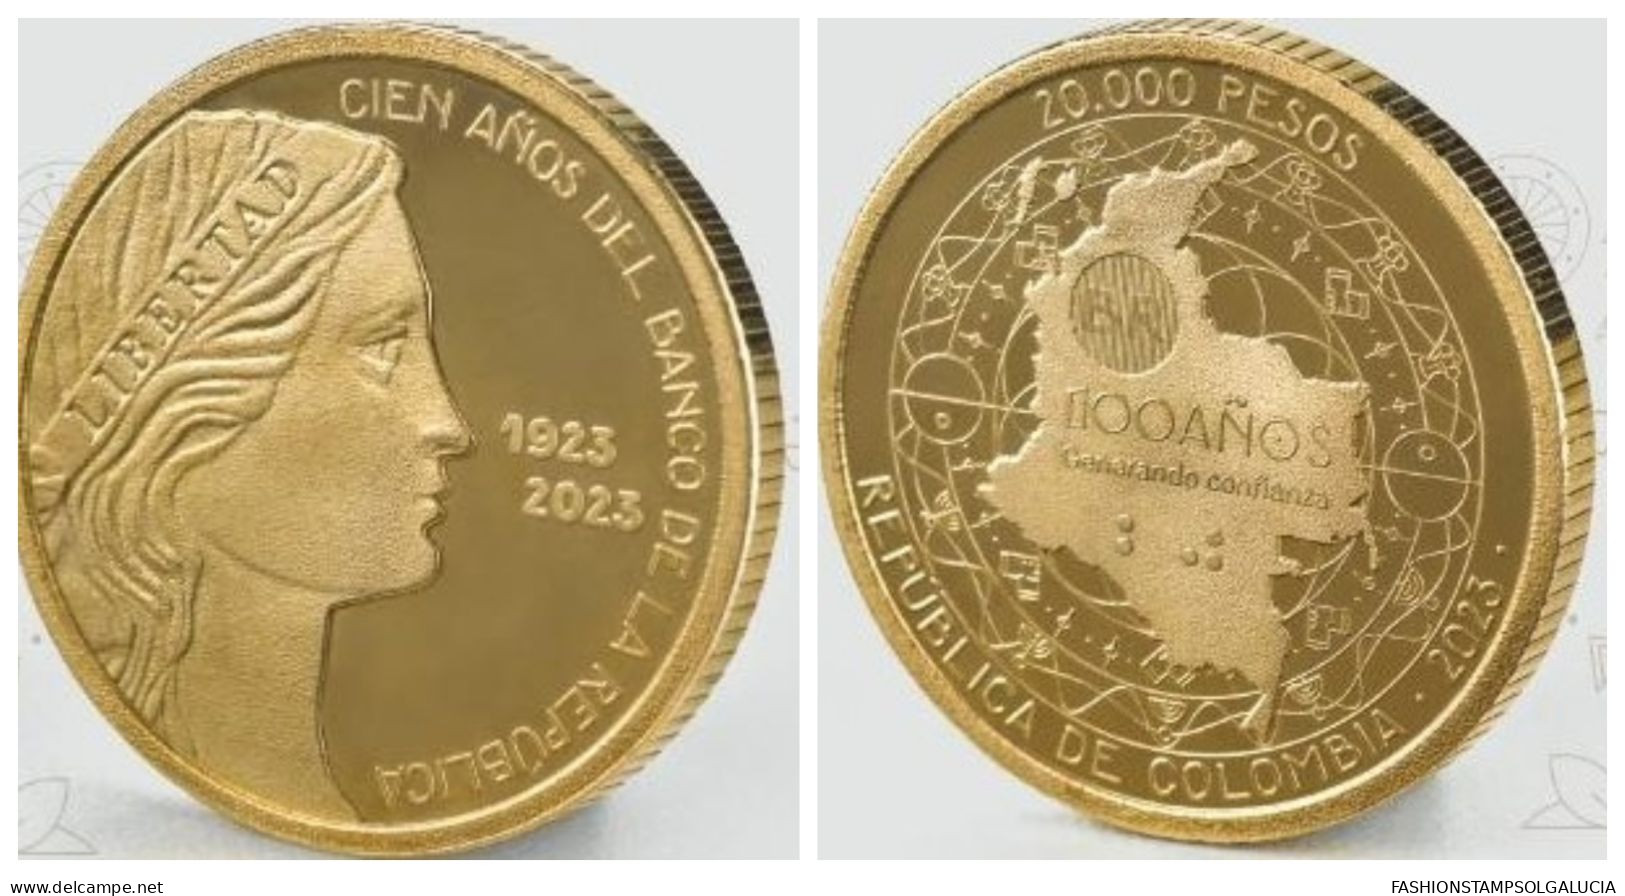 2023 COLOMBIA. CURRENCY, COIN 20000 PESOS, FEMALE FIGURE - THE REPUBLIC. MARIANA, MAP OF COLOMBIA WITH SYMBOLS OF THE P - Colombia